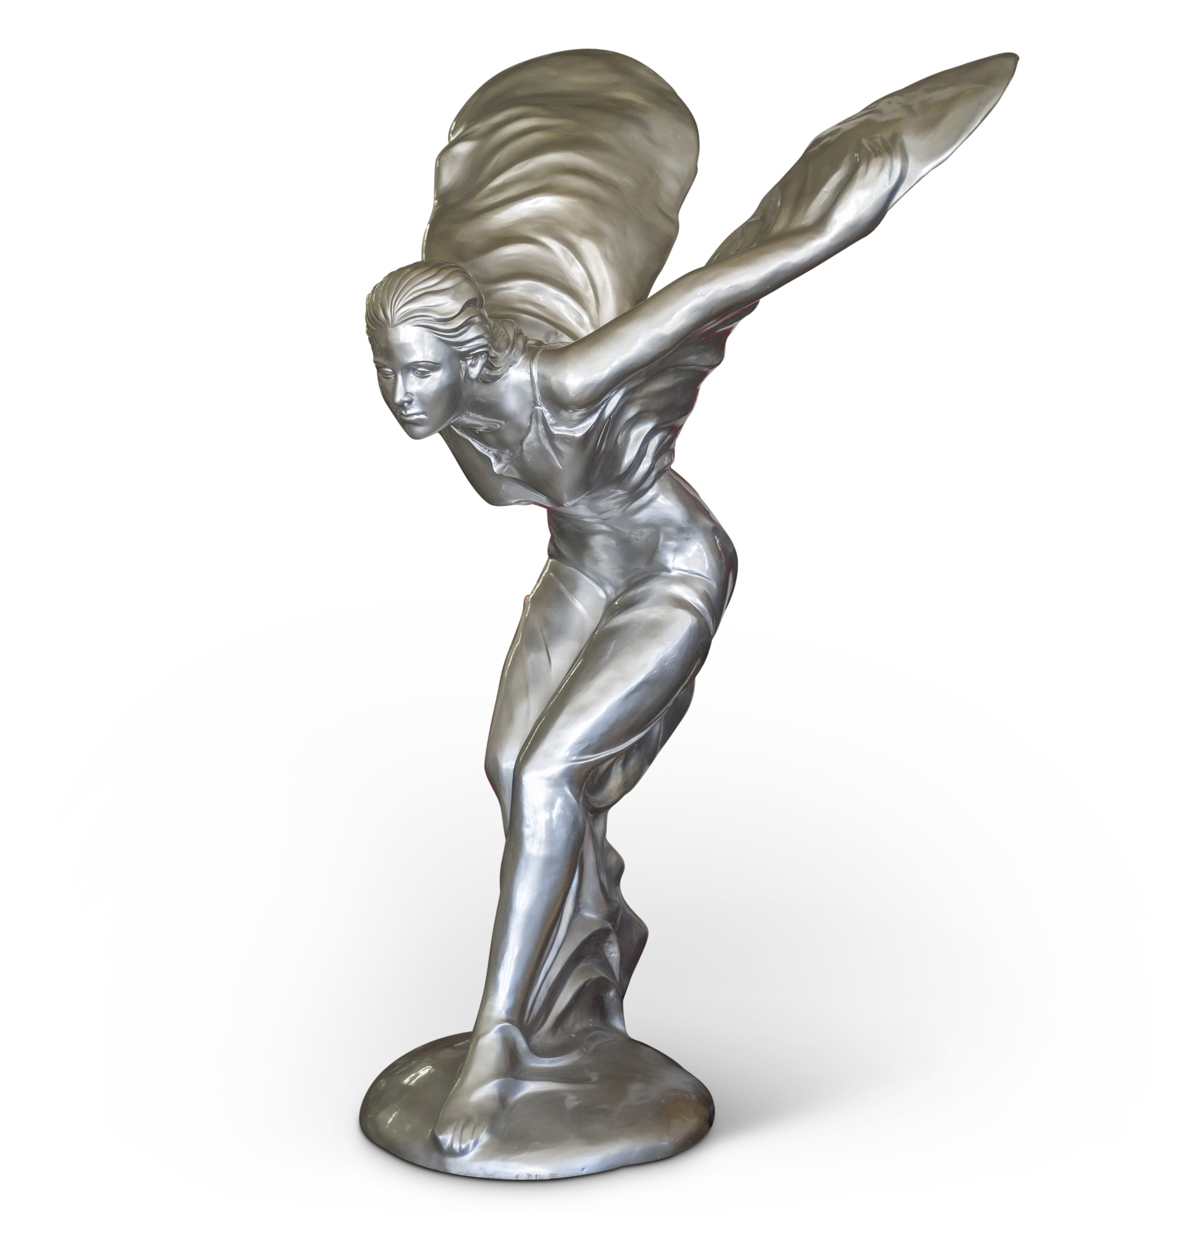 Rolls-Royce Spirit of Ecstasy Dealership Large Metal Display Statue offered at RM Sotheby's The Mitosinka Collection auction